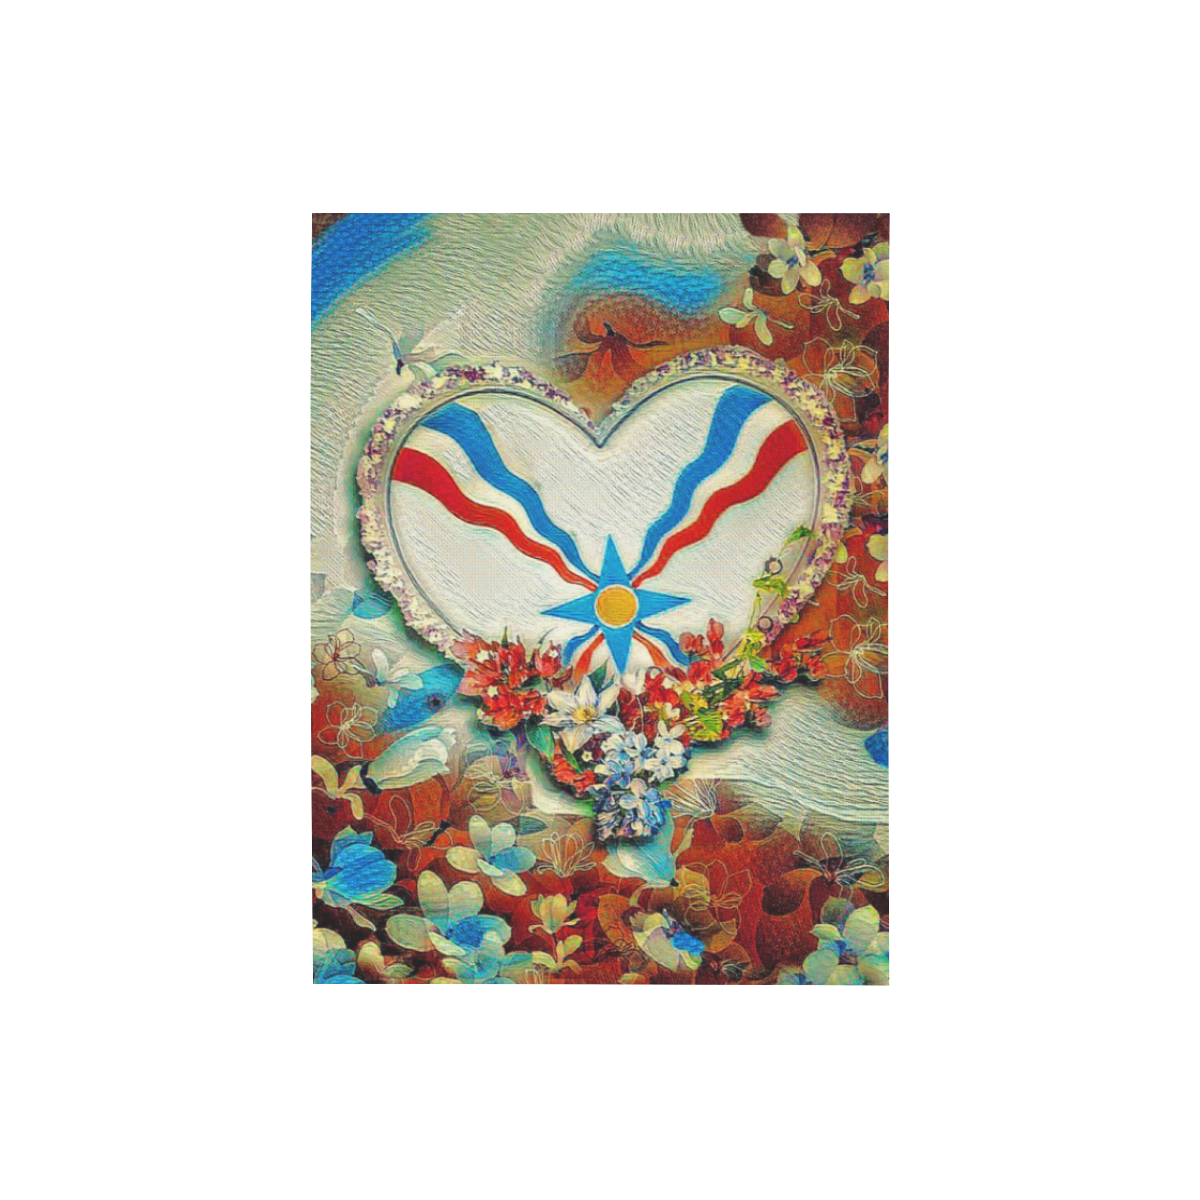 Assyrian Heart Photo Panel for Tabletop Display 6"x8"